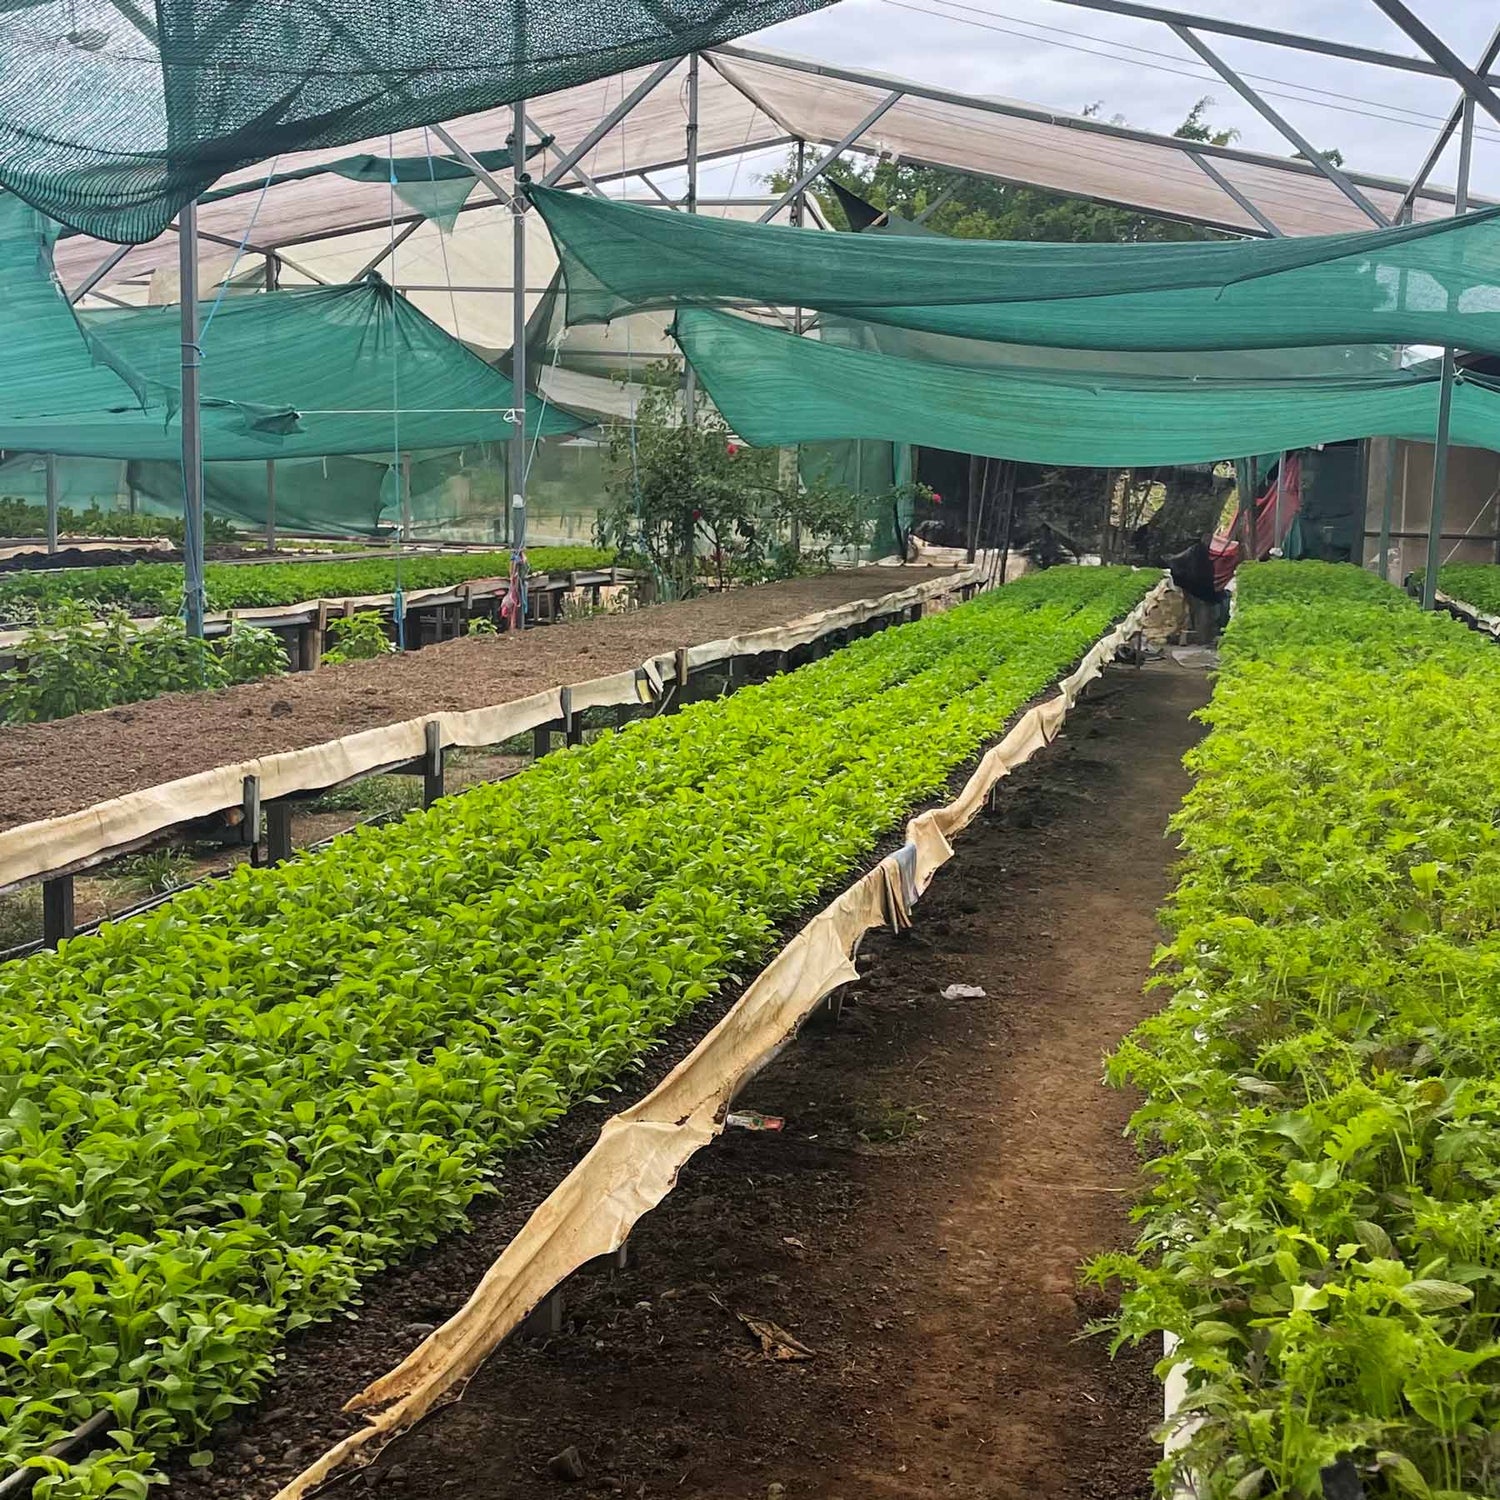 A greenhouse with rows of vegetables growing